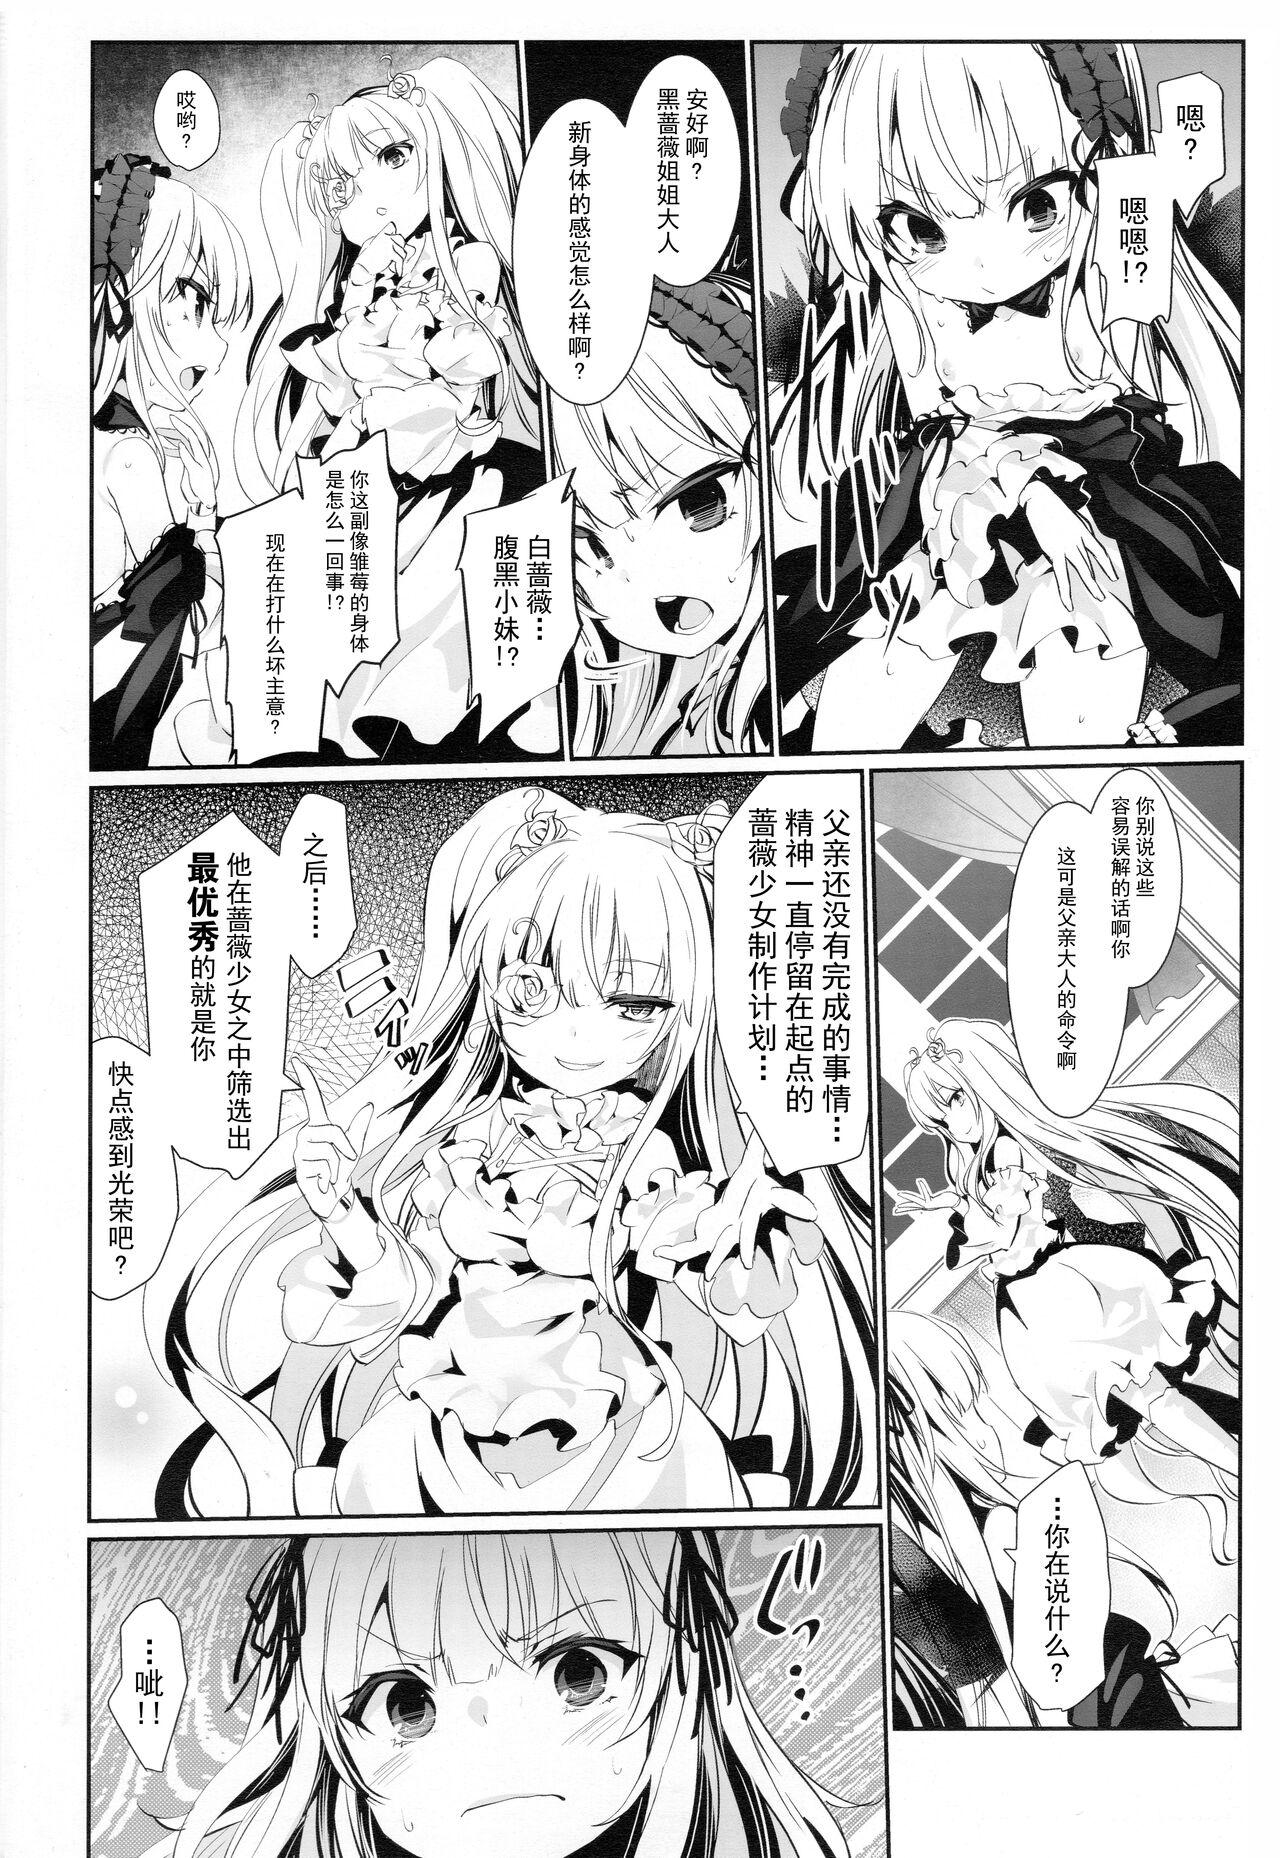 Lezbi Glamour Growth - Rozen maiden Family Taboo - Page 3